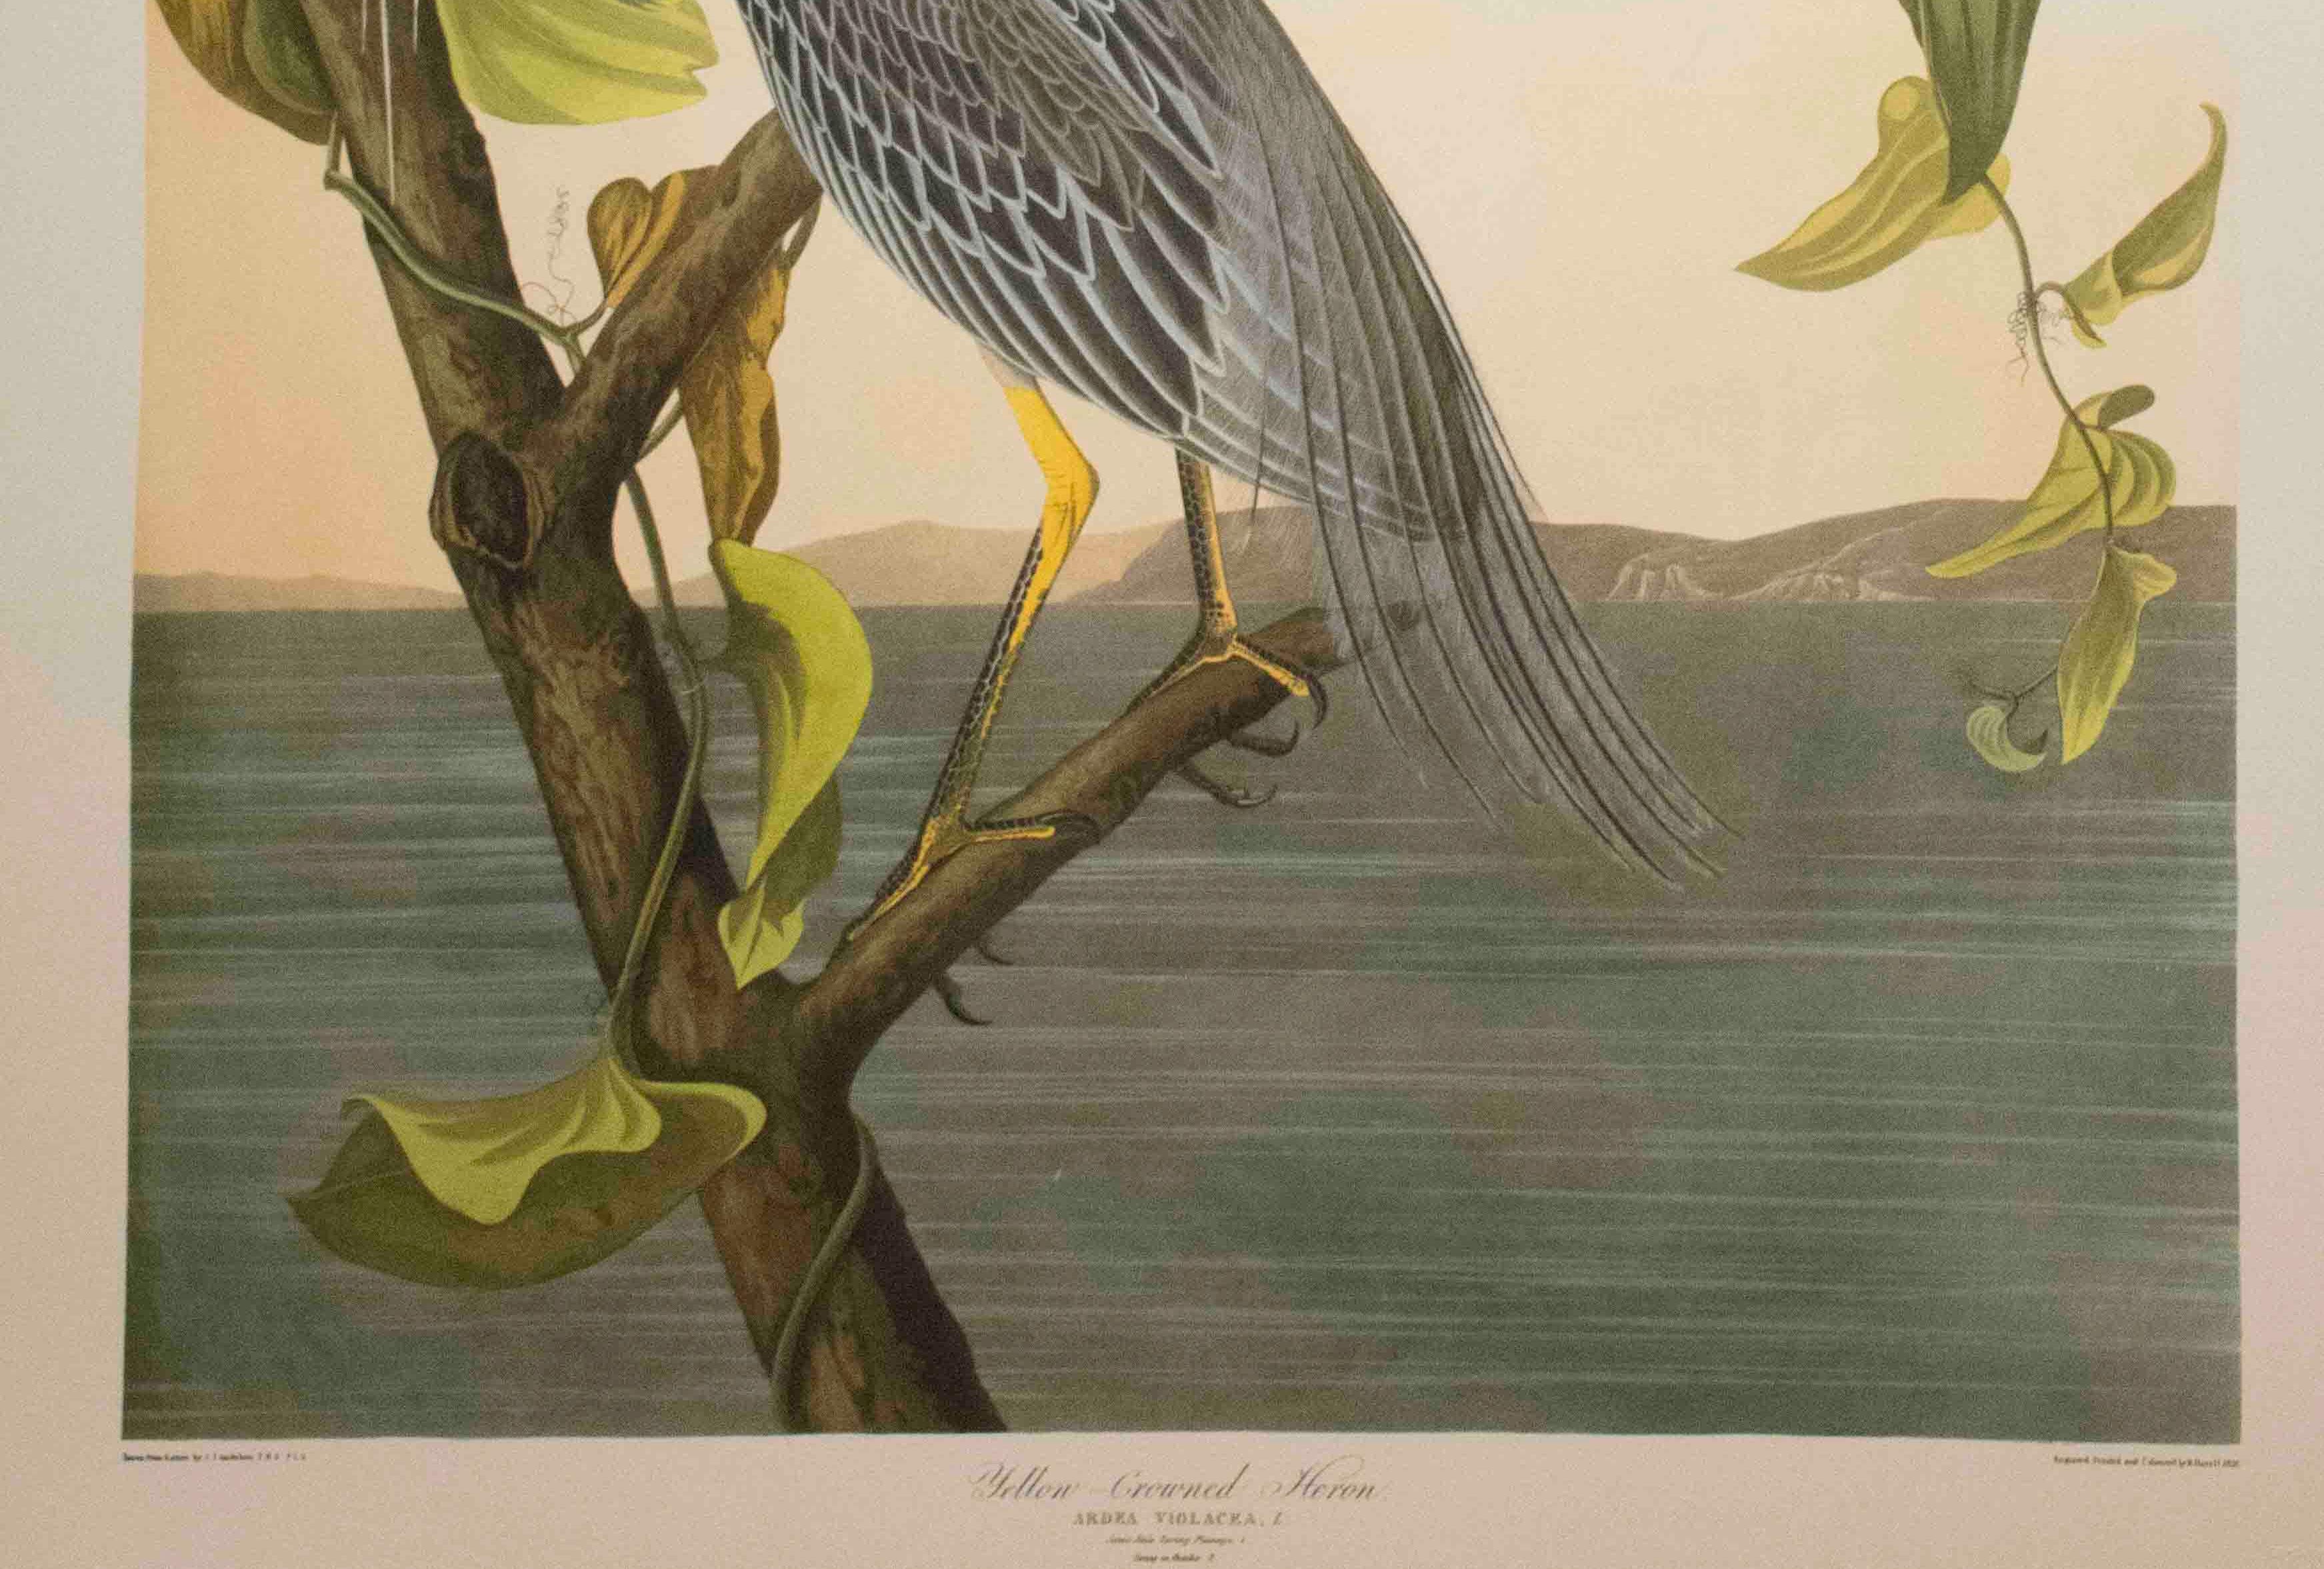 Yellow-Cowned Heron, Edition Pl. 336 - Beige Print by After John James Audubon